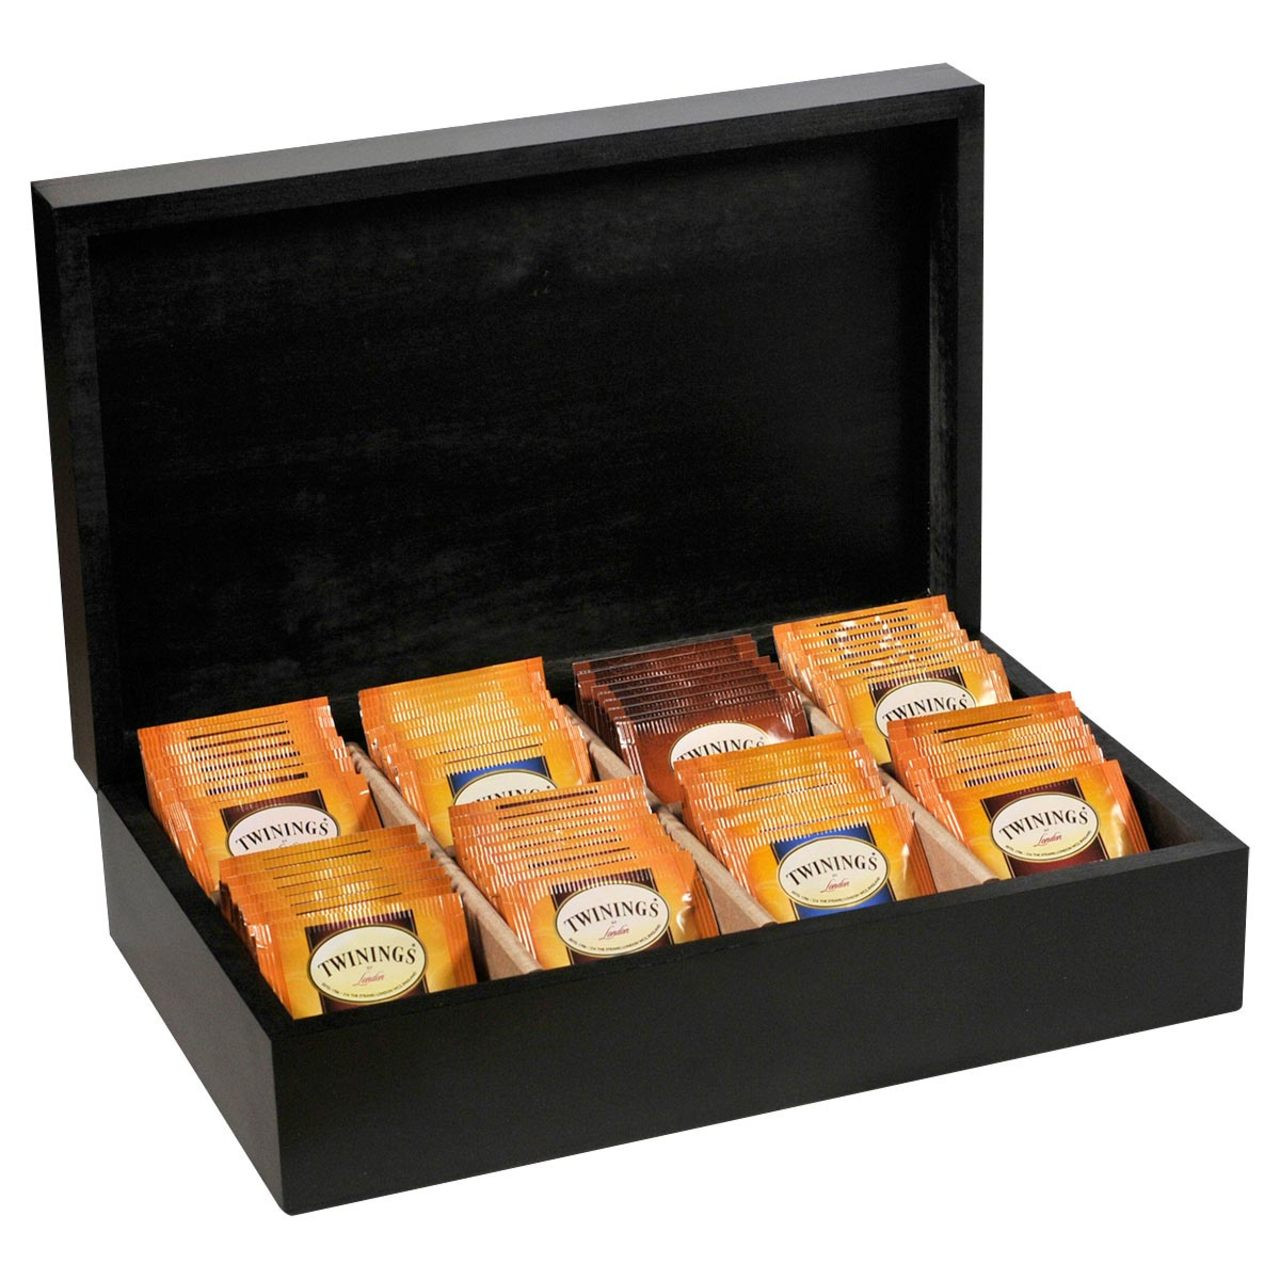 Tea Chests with Tea - Twinings' Earl Grey Selections